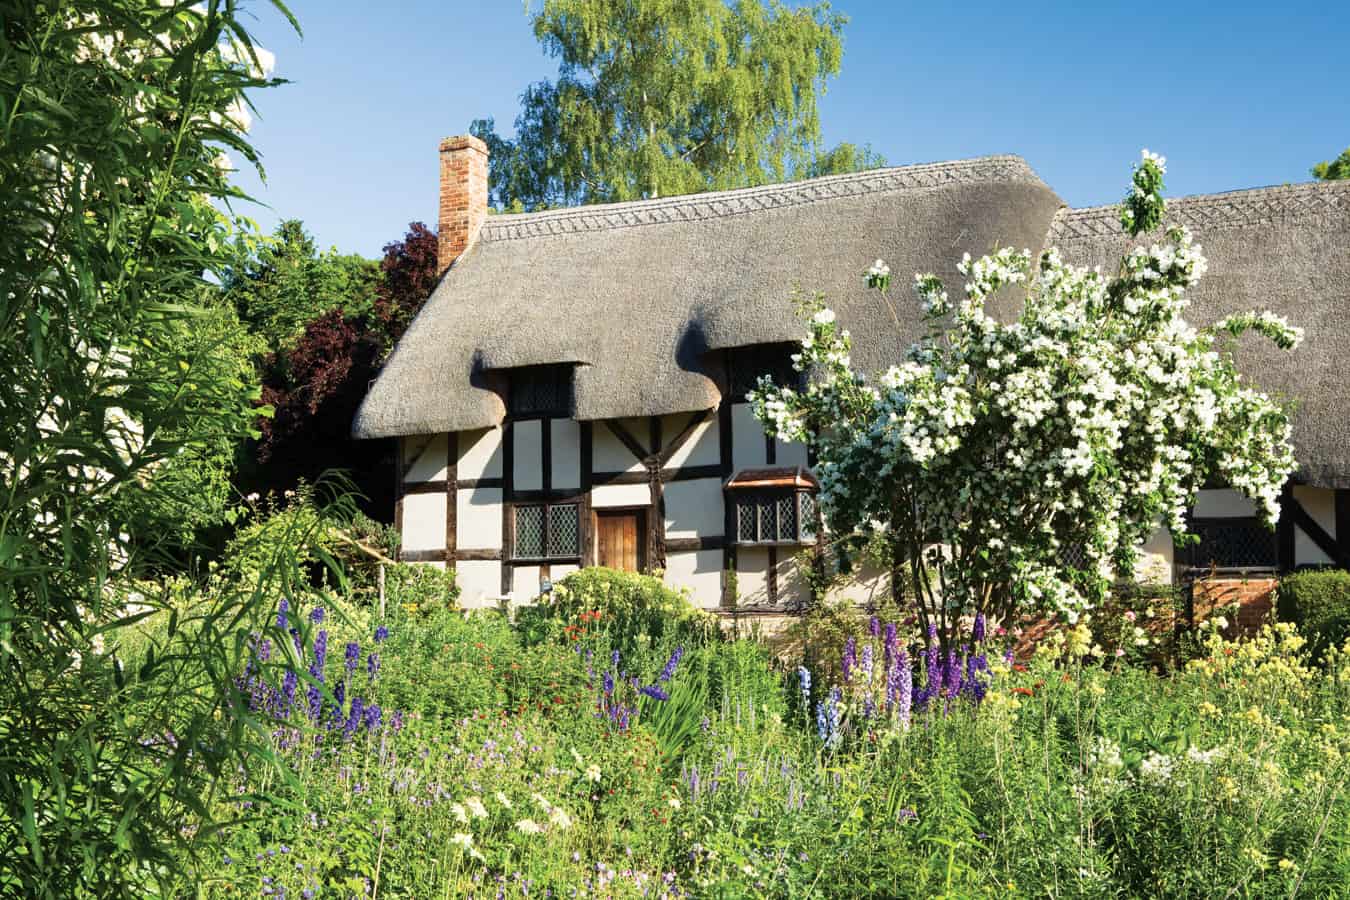 Anne-Hathaway's-Cottage-and-Gardens-photo-credit-VisitBritain-and-LeeBeel